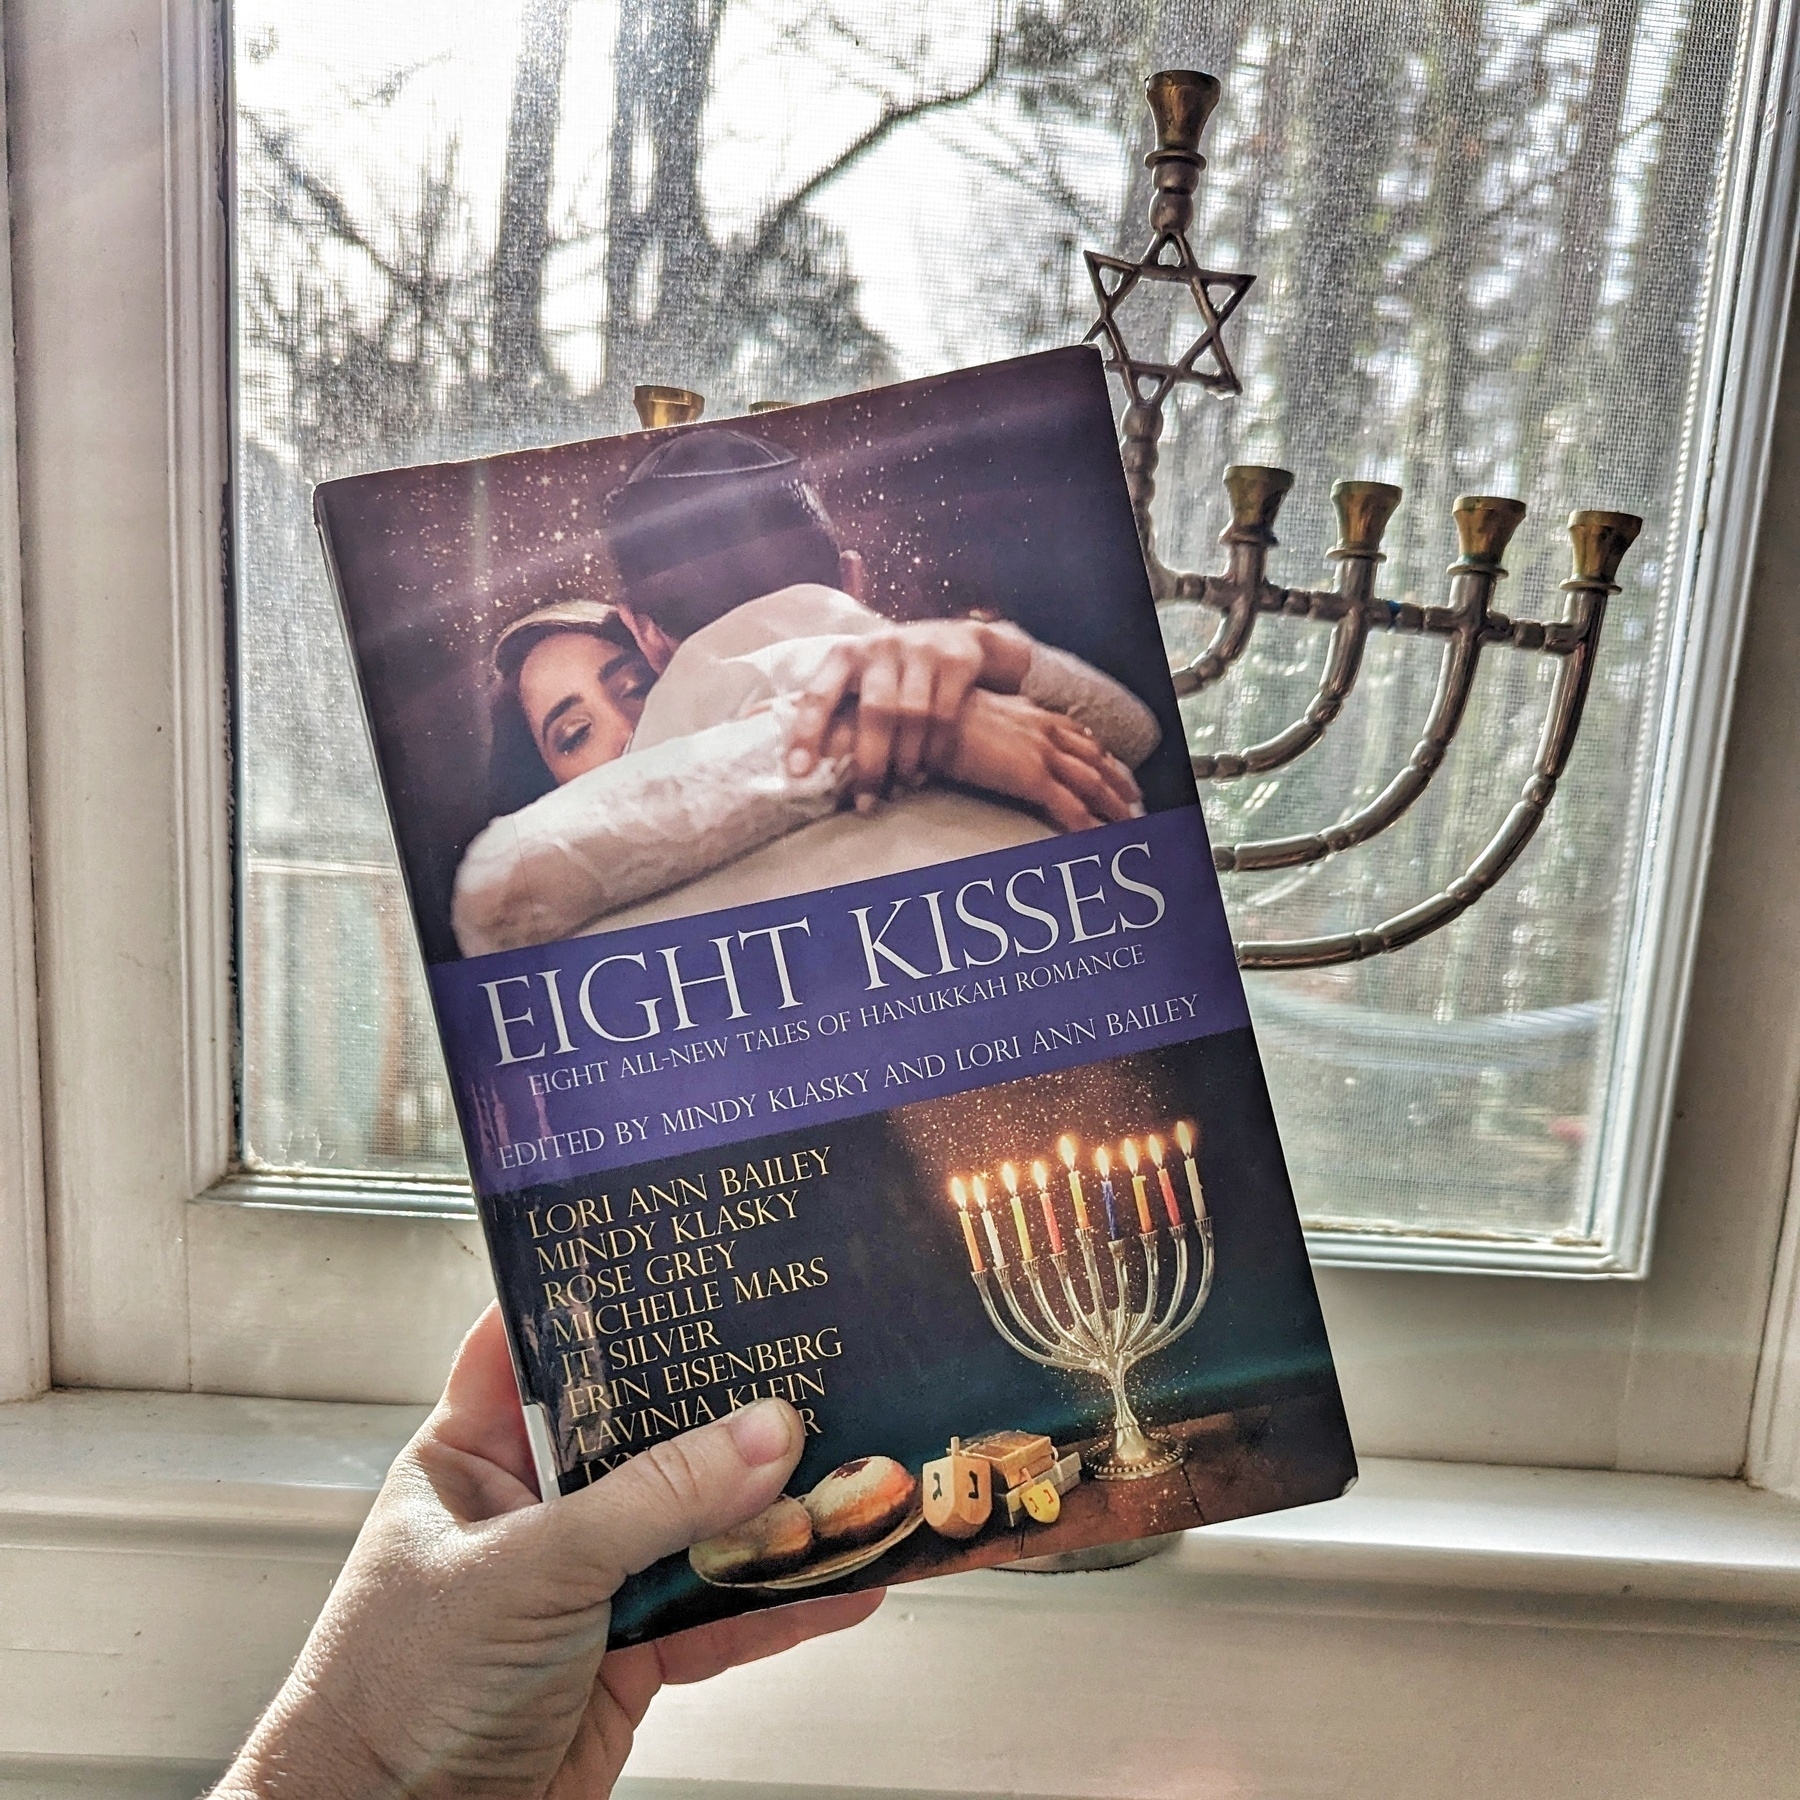 A hand holding the book “Eight Kisses” in front of a window with a menorah on the sill, showcasing a cover featuring two people embracing and a lit menorah. The book is a collection of eight stories of Hanukkah romance by various authors.